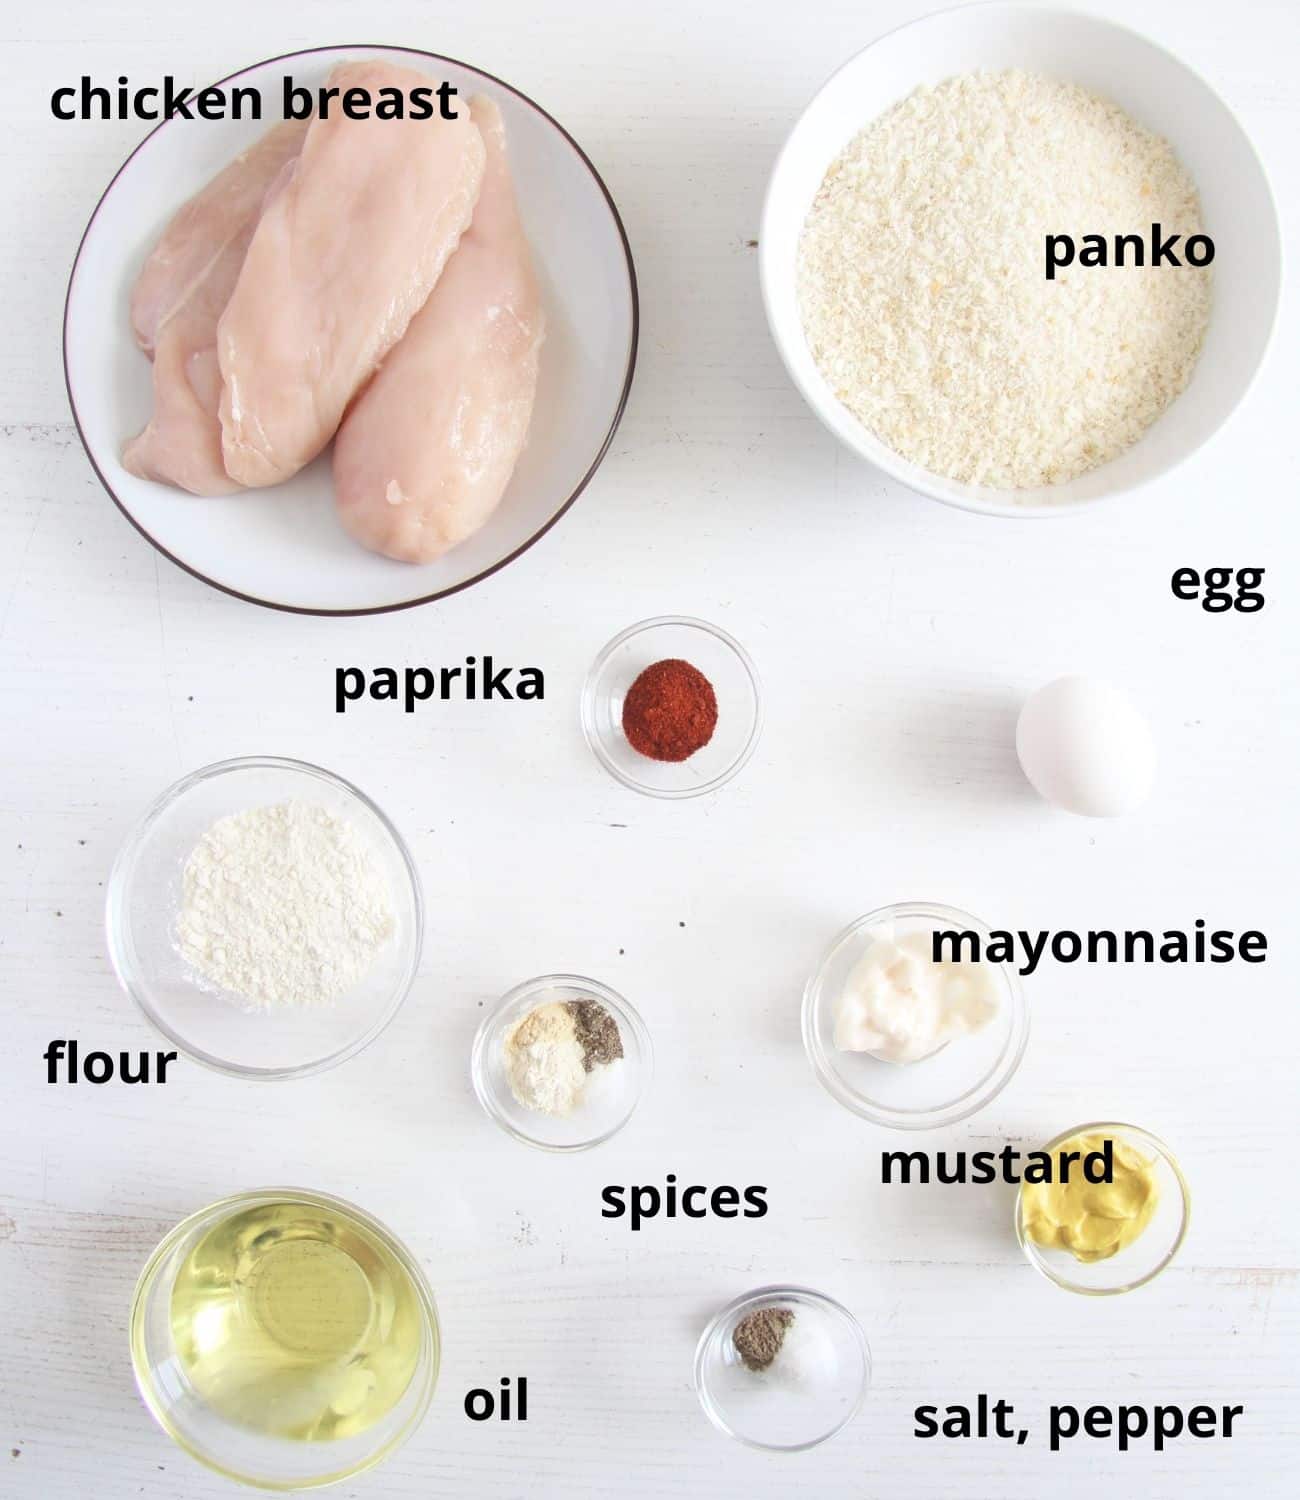 listed ingredients for making fried chicken with breadcrumbs.